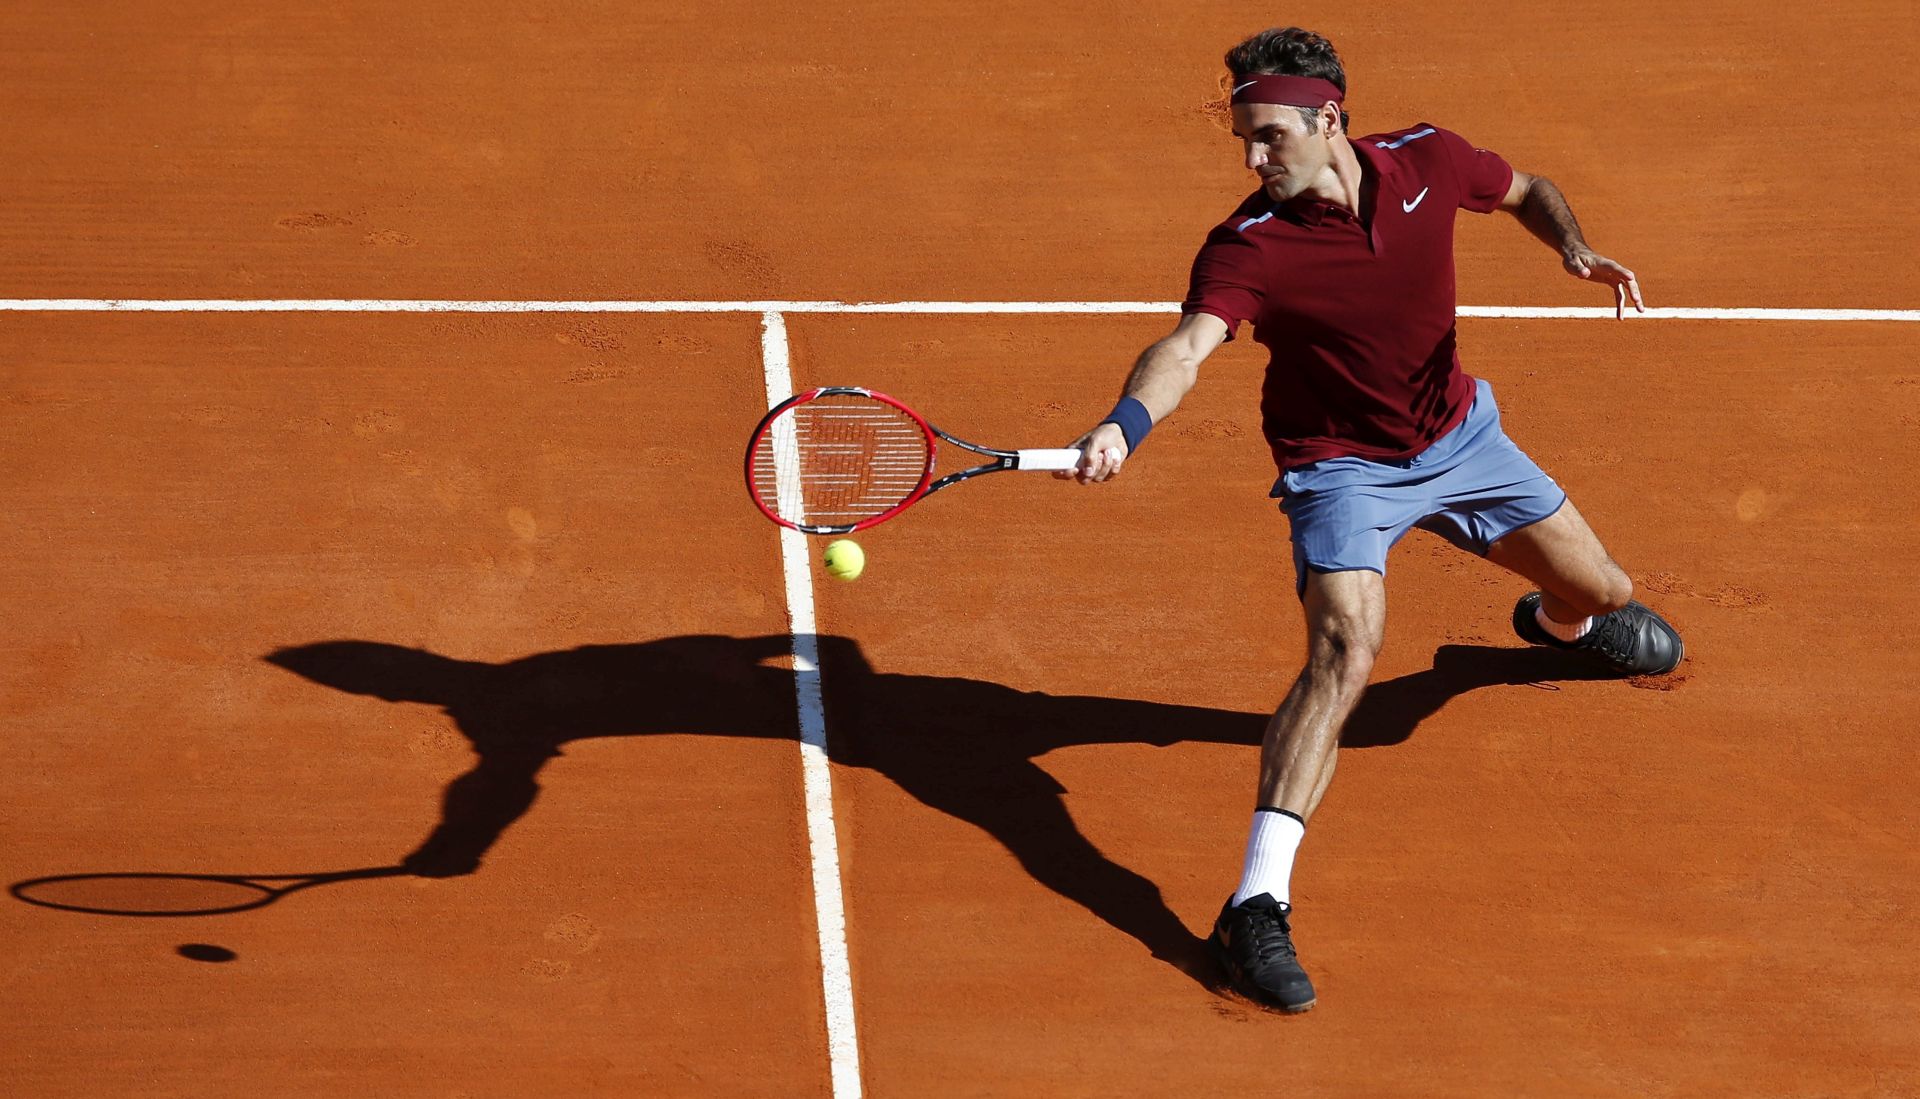 epa05255658 Roger Federer of Switzerland returns the ball to Guillermo Garcia Lopez of Spain during their second round match at the Monte-Carlo Rolex Masters tennis tournament in Roquebrune Cap Martin, France, 12 April 2016.  EPA/SEBASTIEN NOGIER